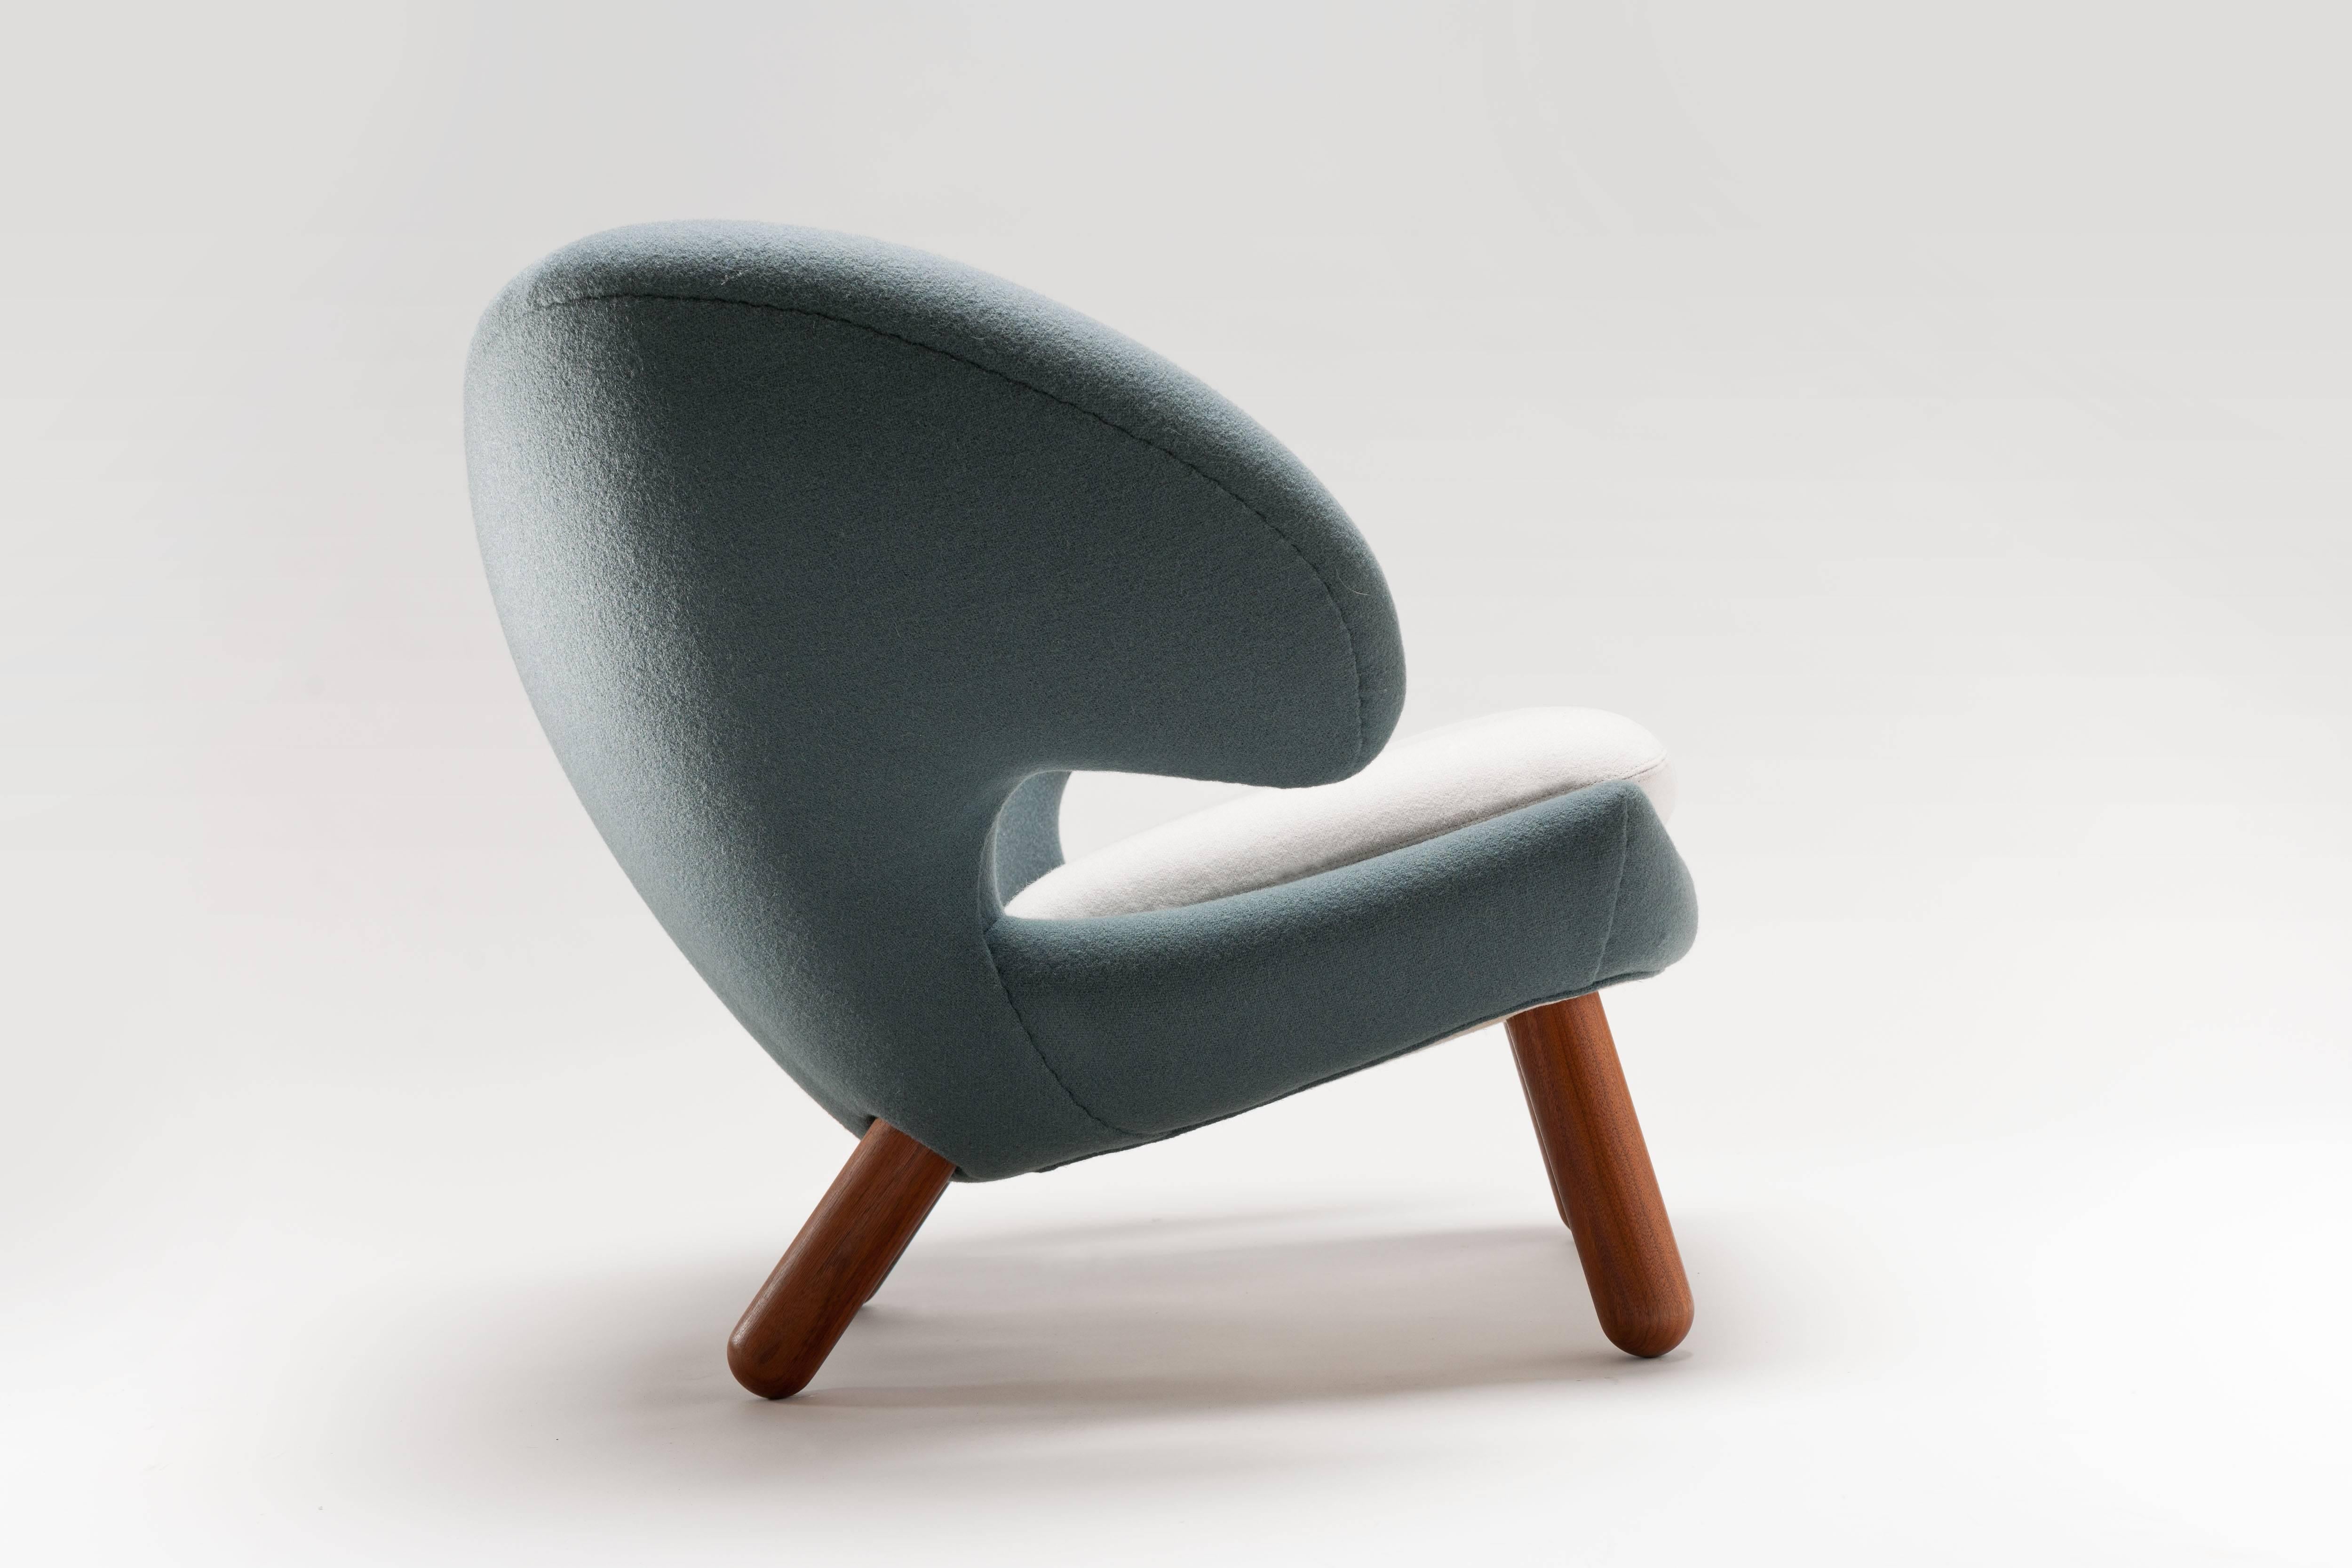 Hand-stitched upholstered Pelican chair by Danish designer Finn Juhl, originally designed in 1939 and made back then in very limited numbers, therefor not to be found vintage.
The chair is upholstery in a fabric by Kvadrat and comes with solid